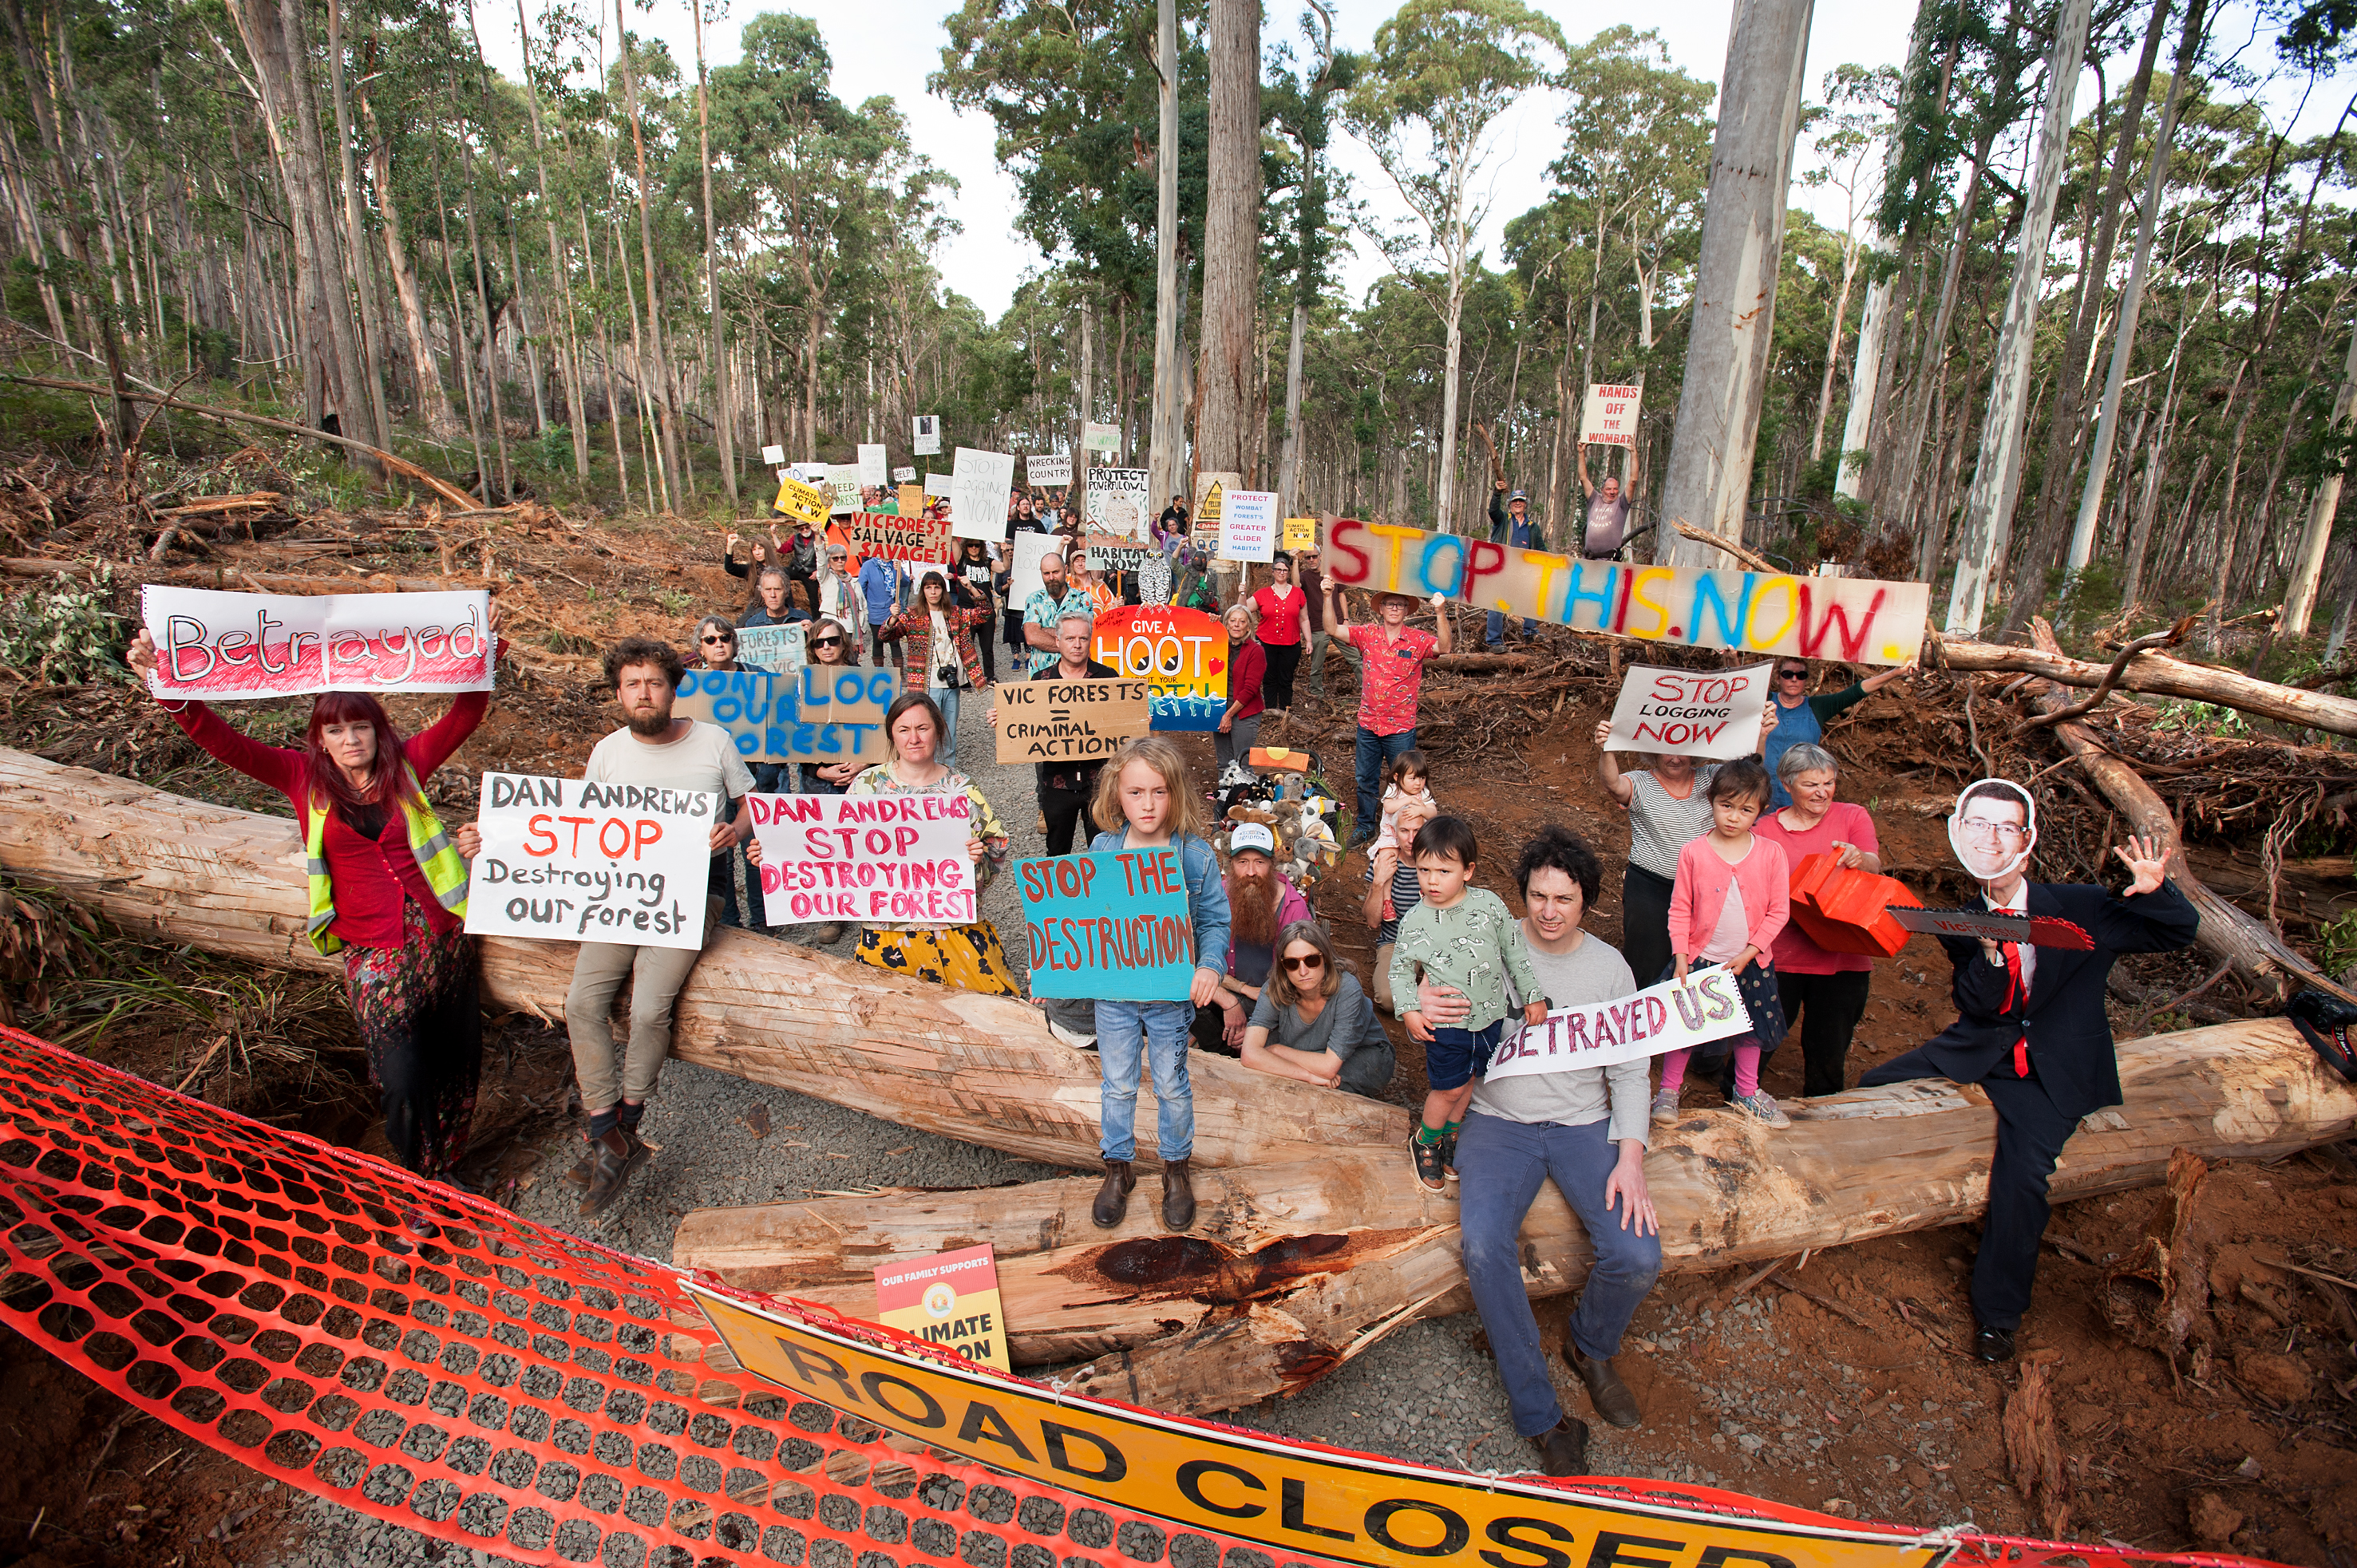 Over 100 people walked into a logged area of the Wombat State Forest to express their opposition to a destructive salvage operation